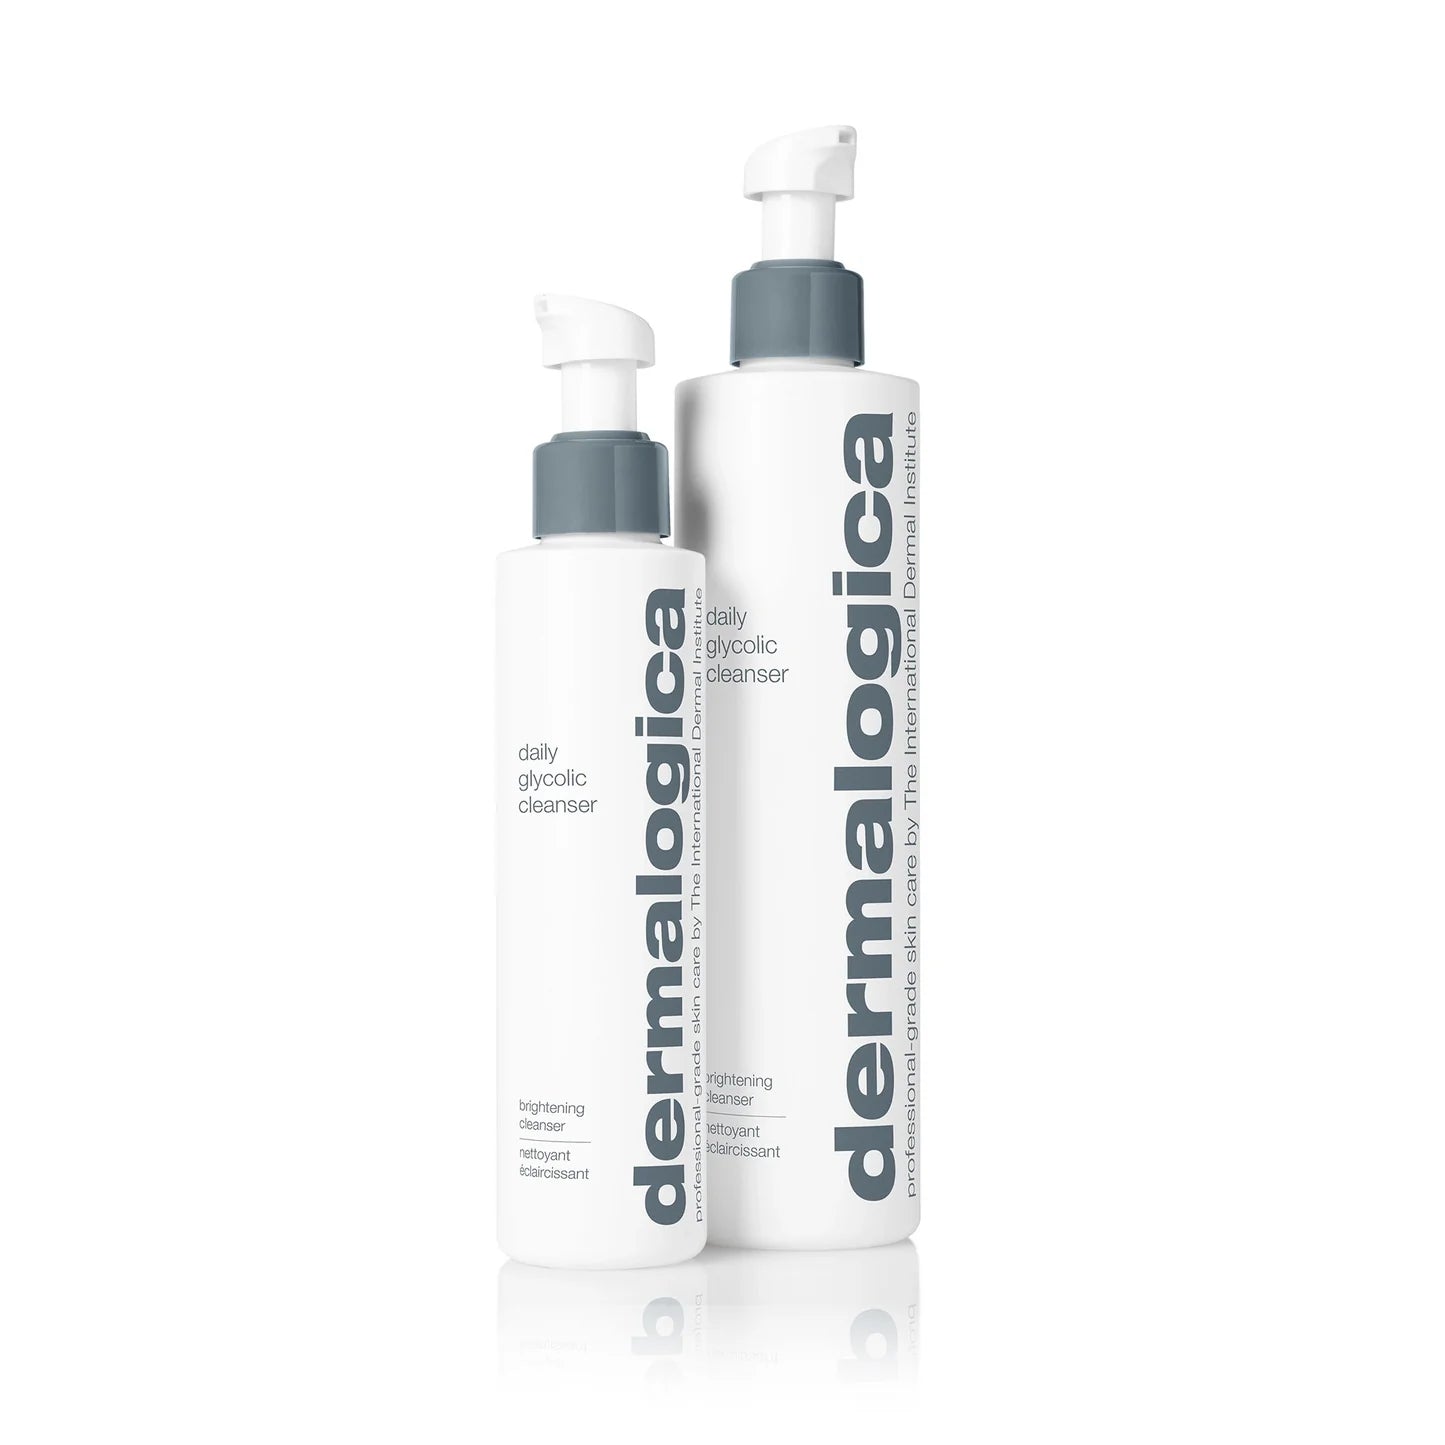 Daily Glycolic Cleanser (7014220628146)